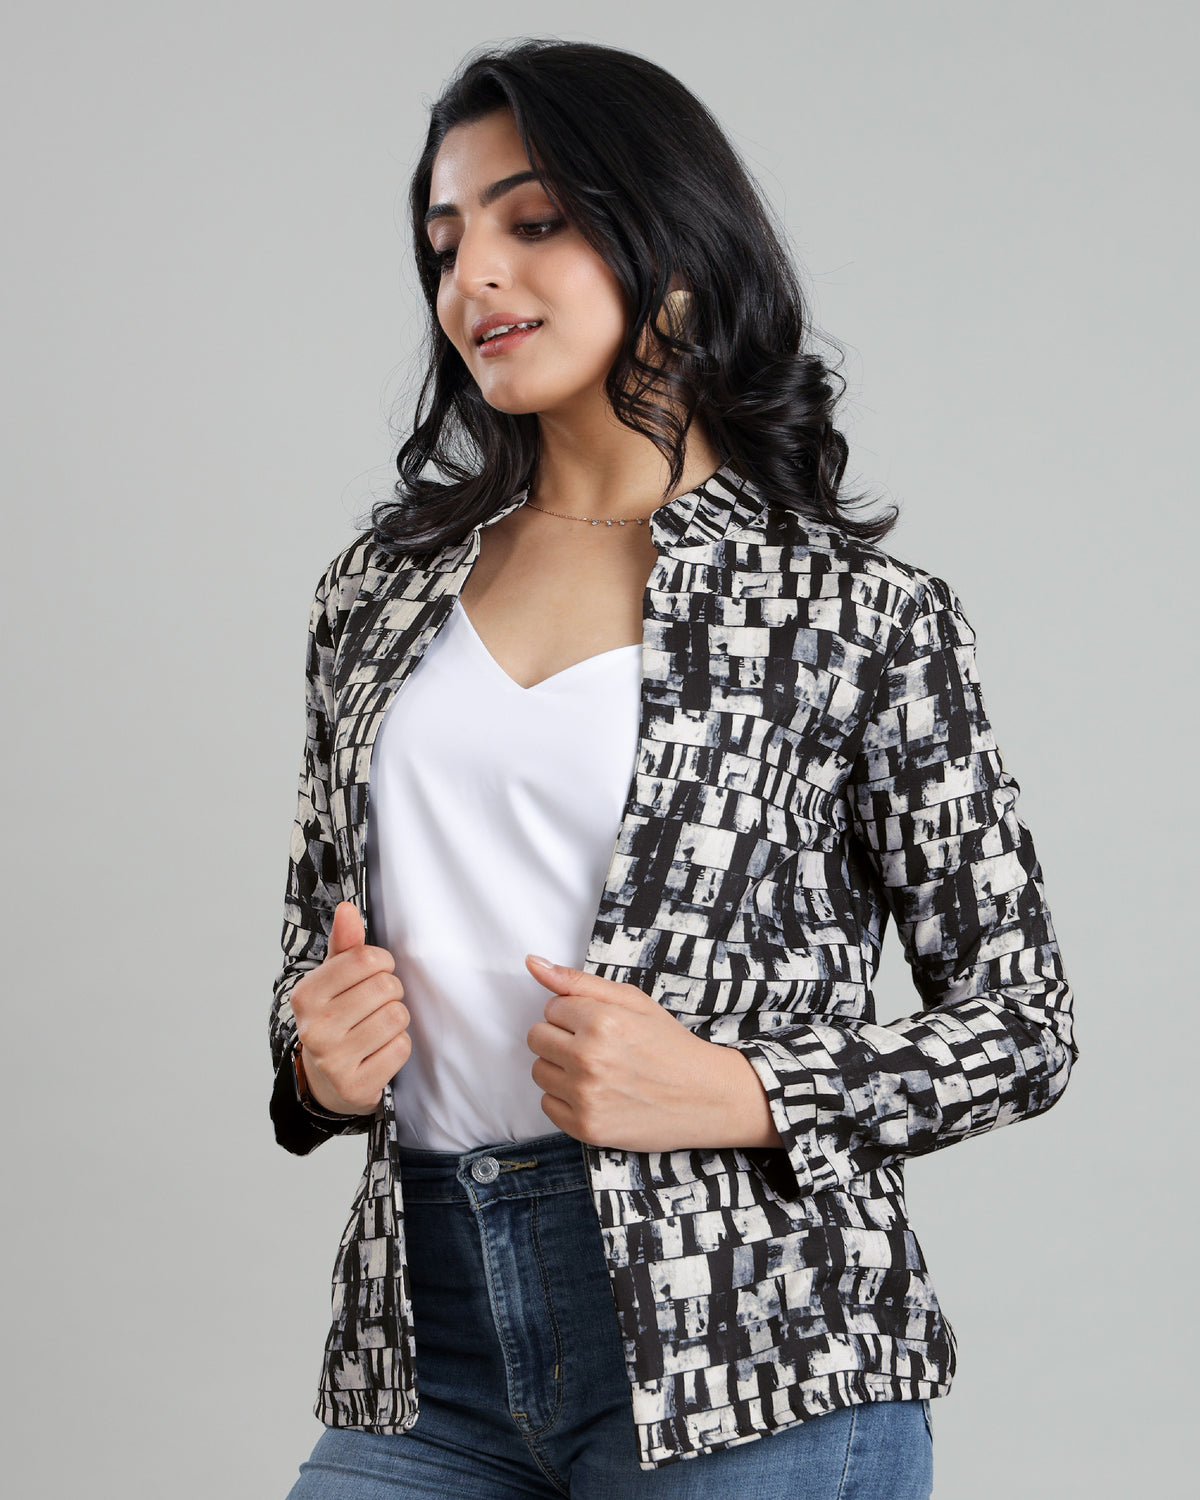 Abstract Opulence: Luxurious Jacket For Women